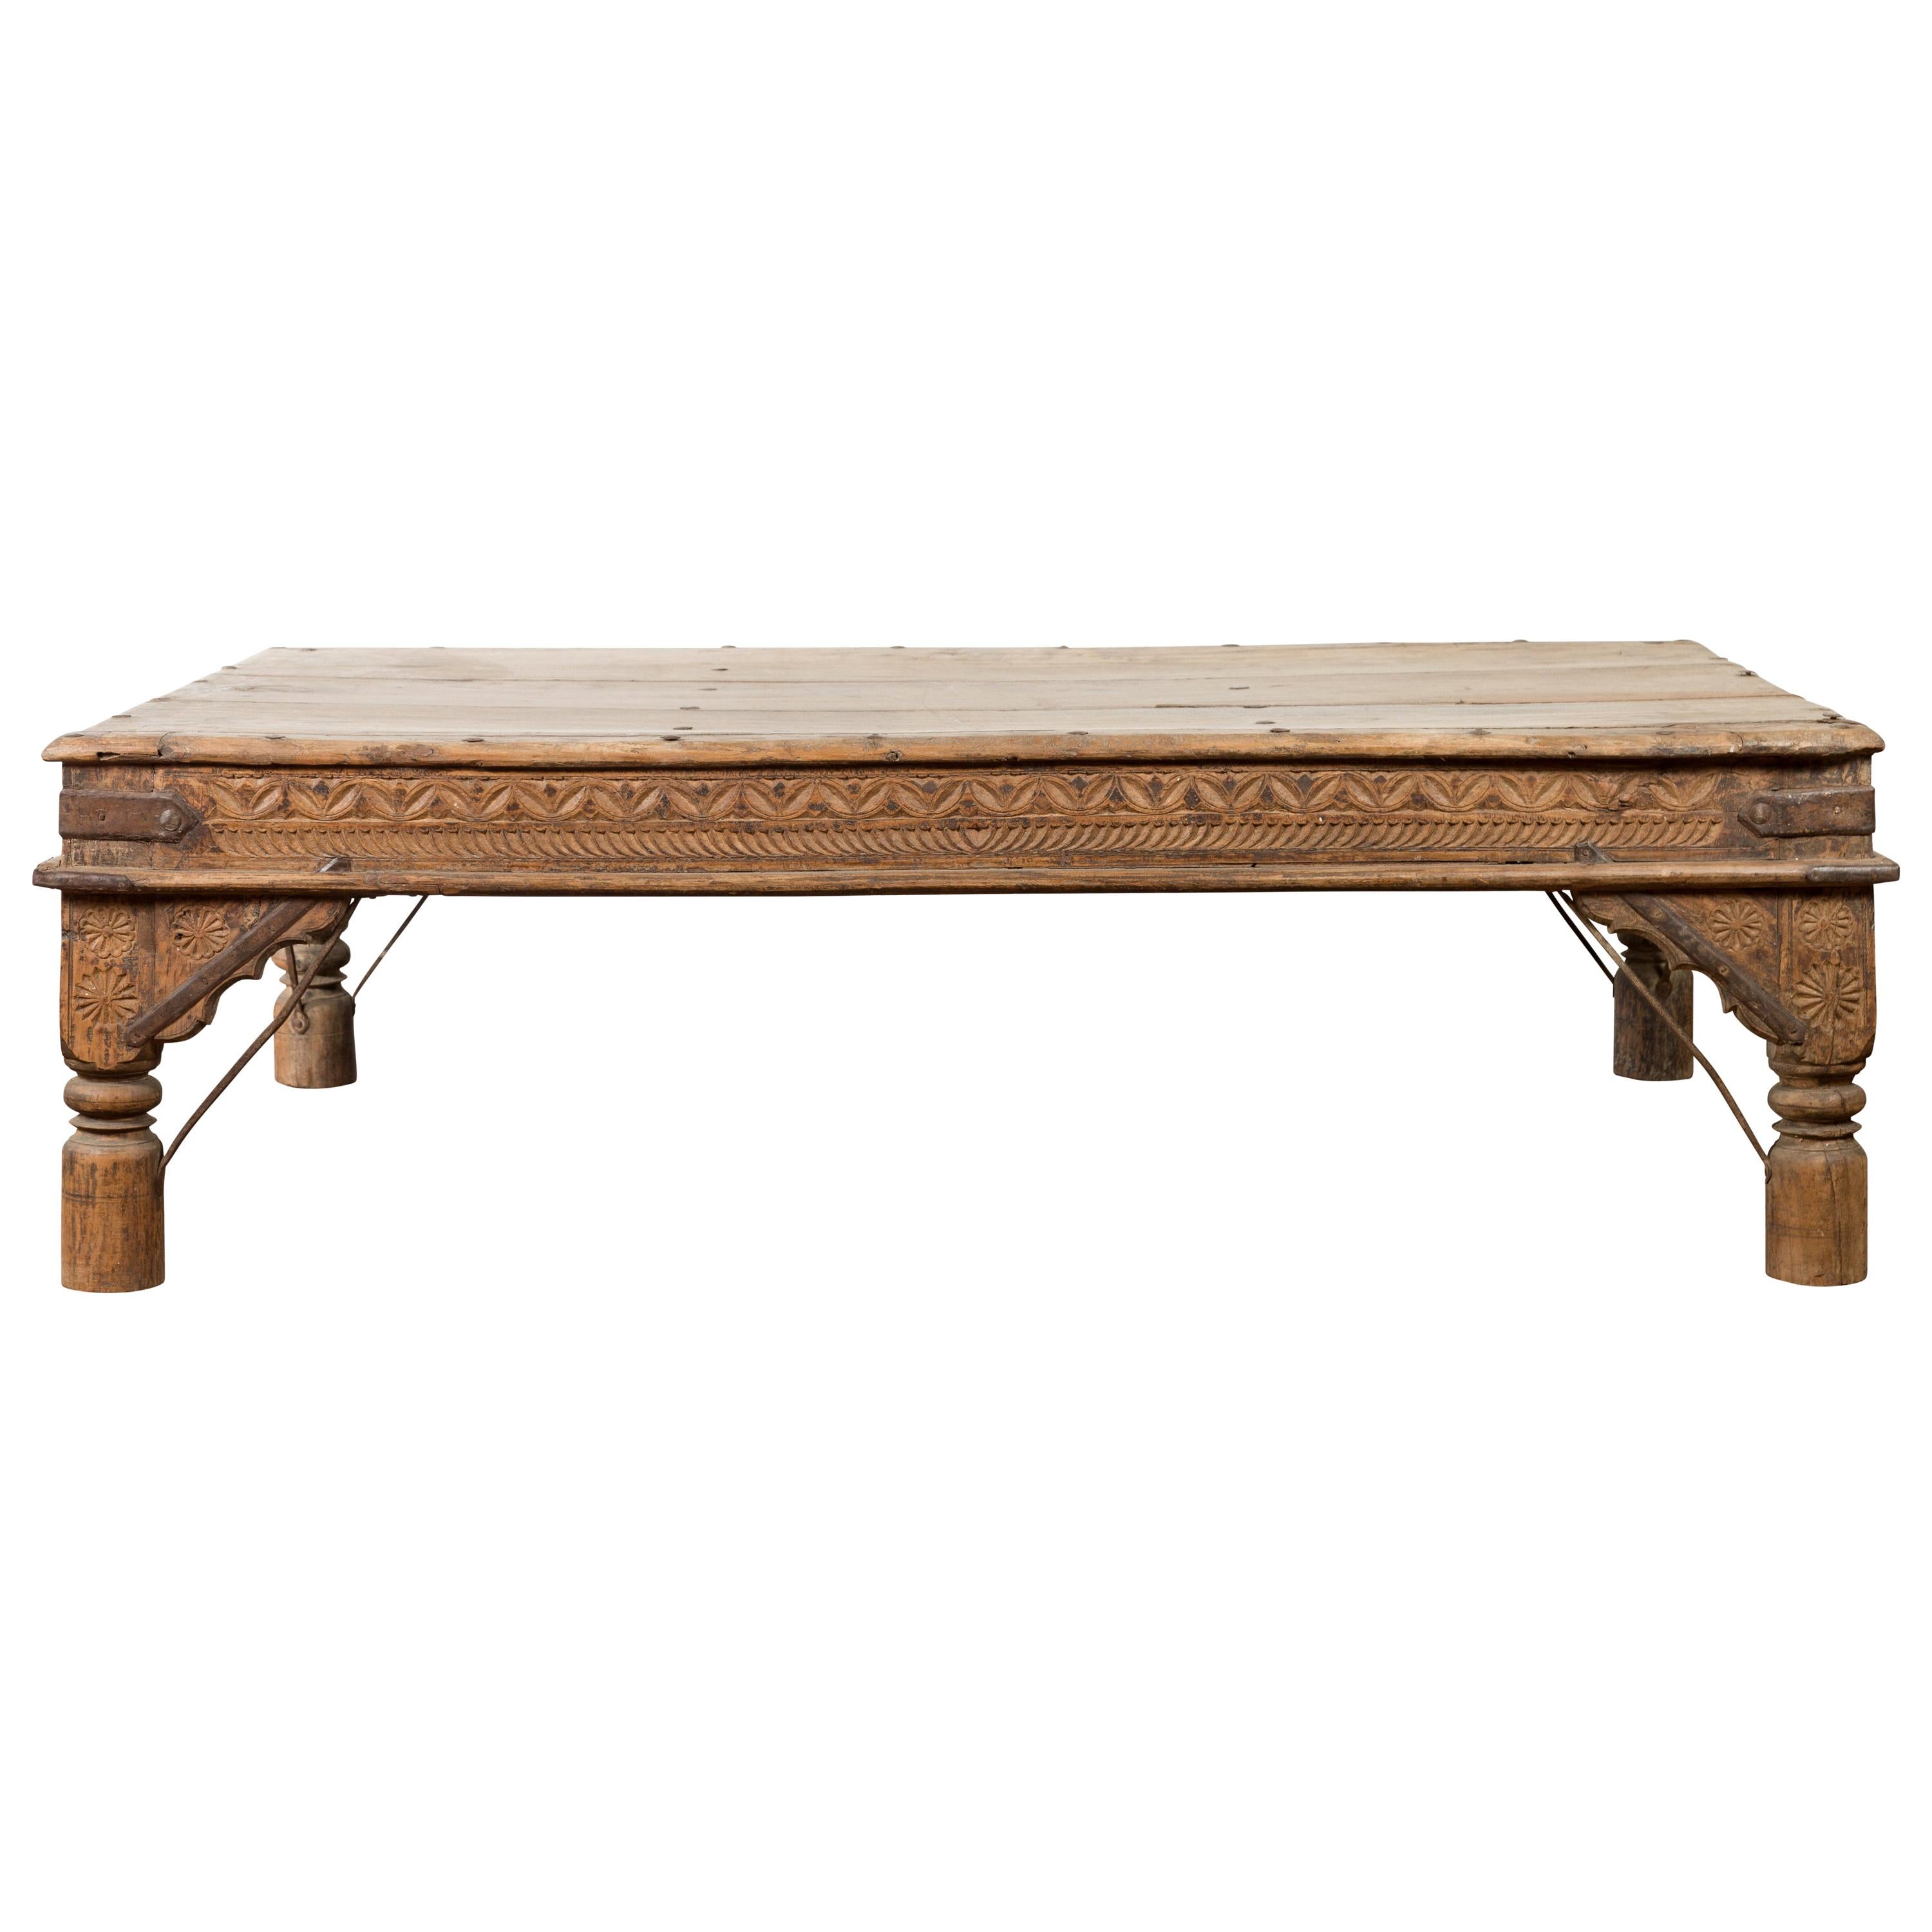 Oversized Antique Temple Door with Studs Made into a Carved Coffee Table